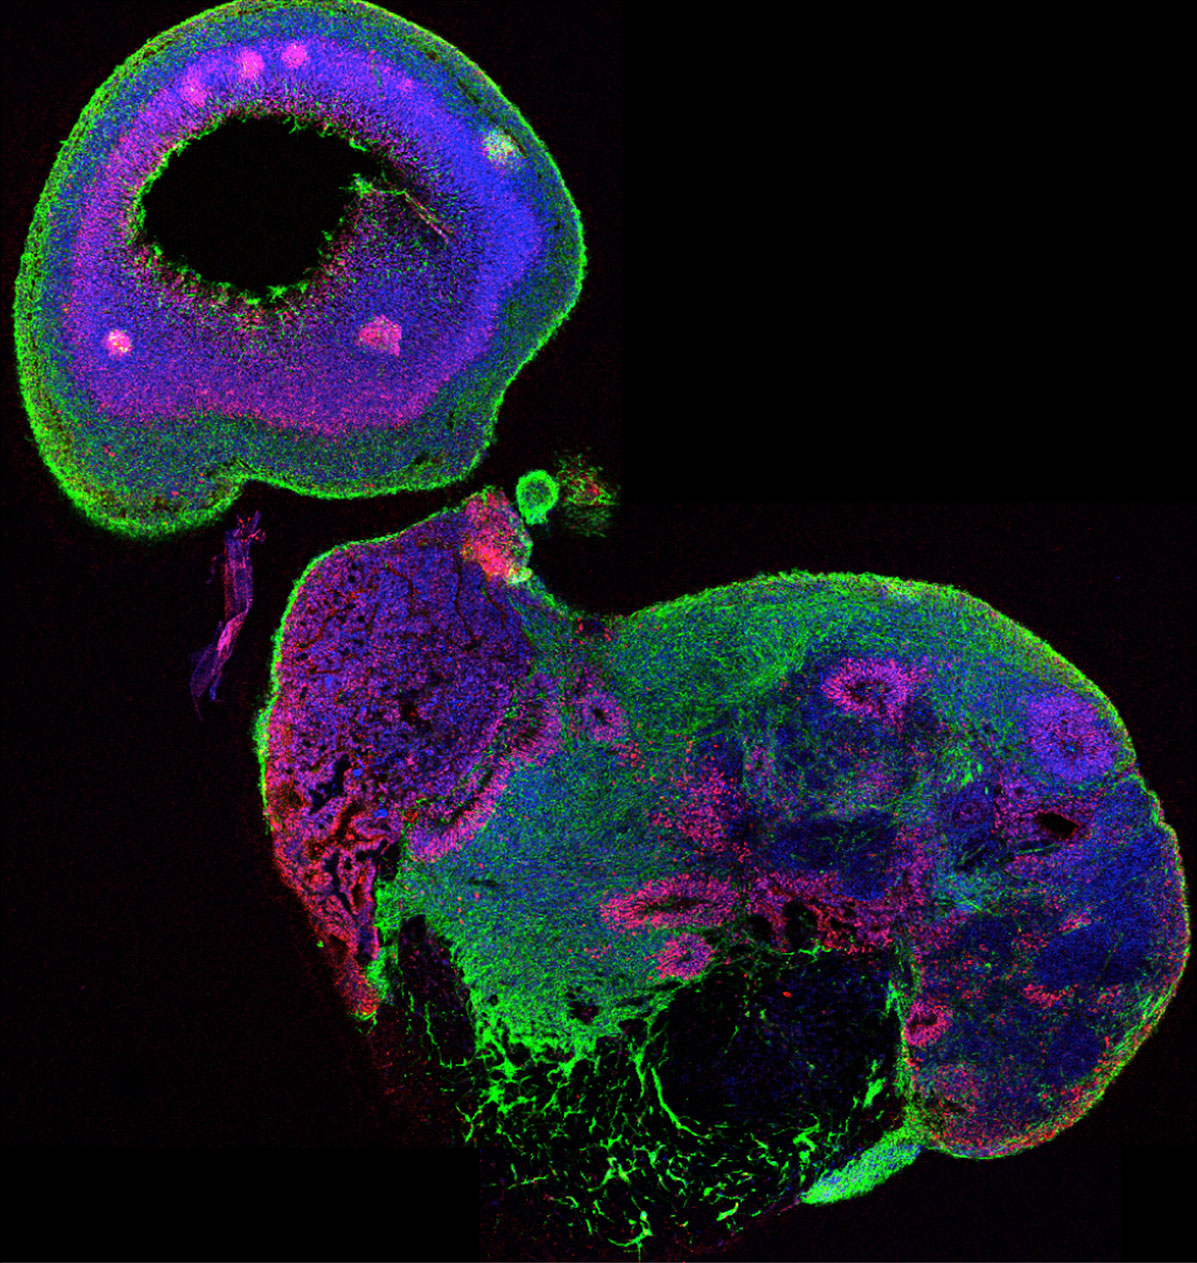 A section through a whole organoid stained for neurons in green and neural stem cells in red. All cell nuclei are stained in blue.